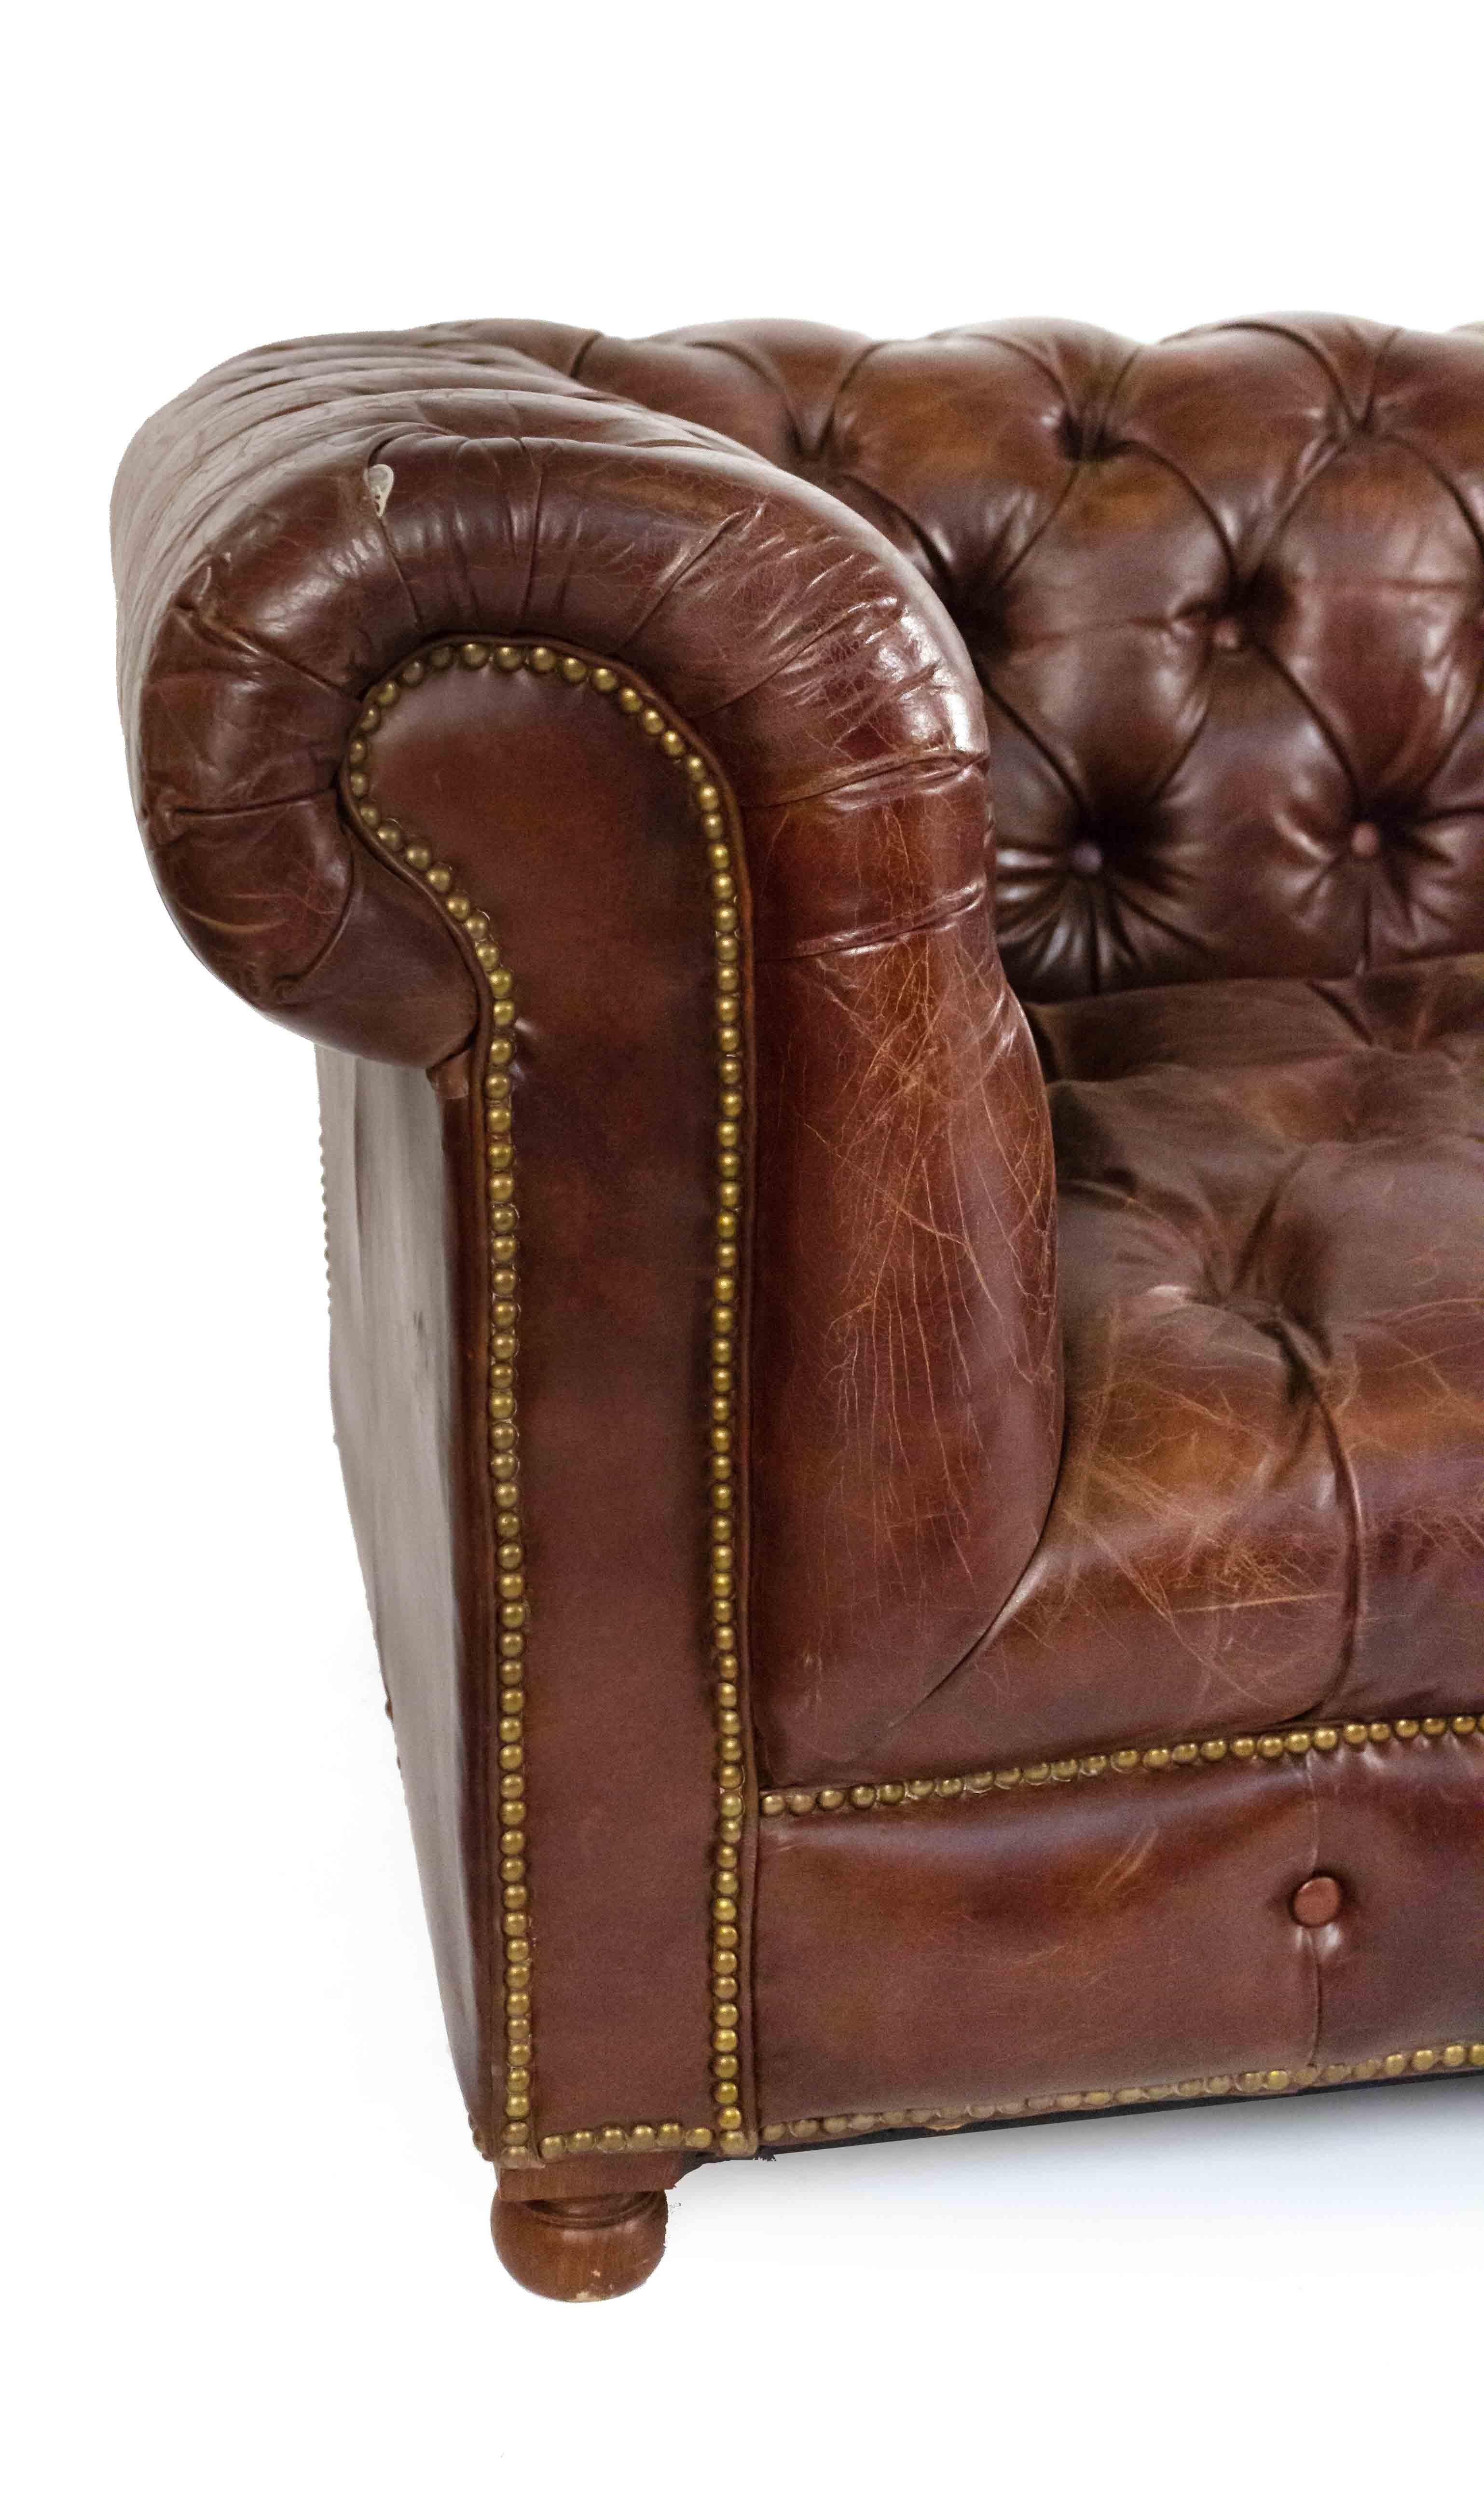 English Chocolate Brown Leather Chesterfield Sofa